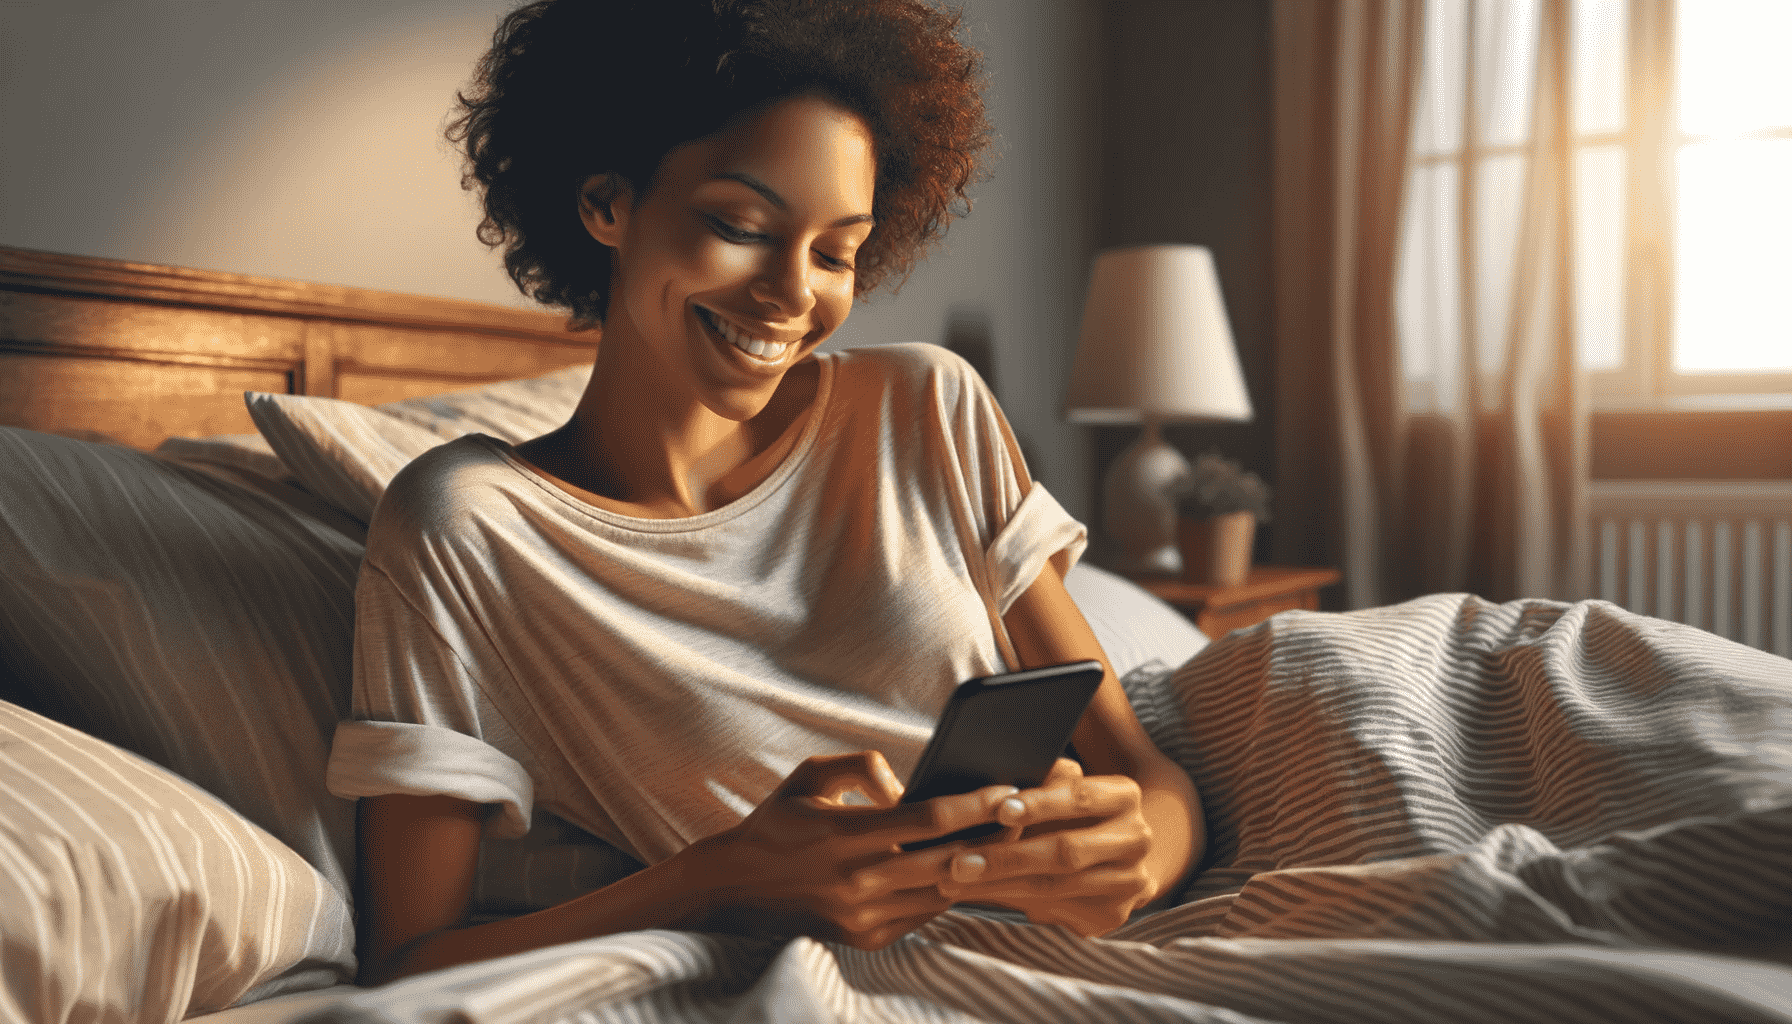 Why a Player Might Still Send Good Morning Texts